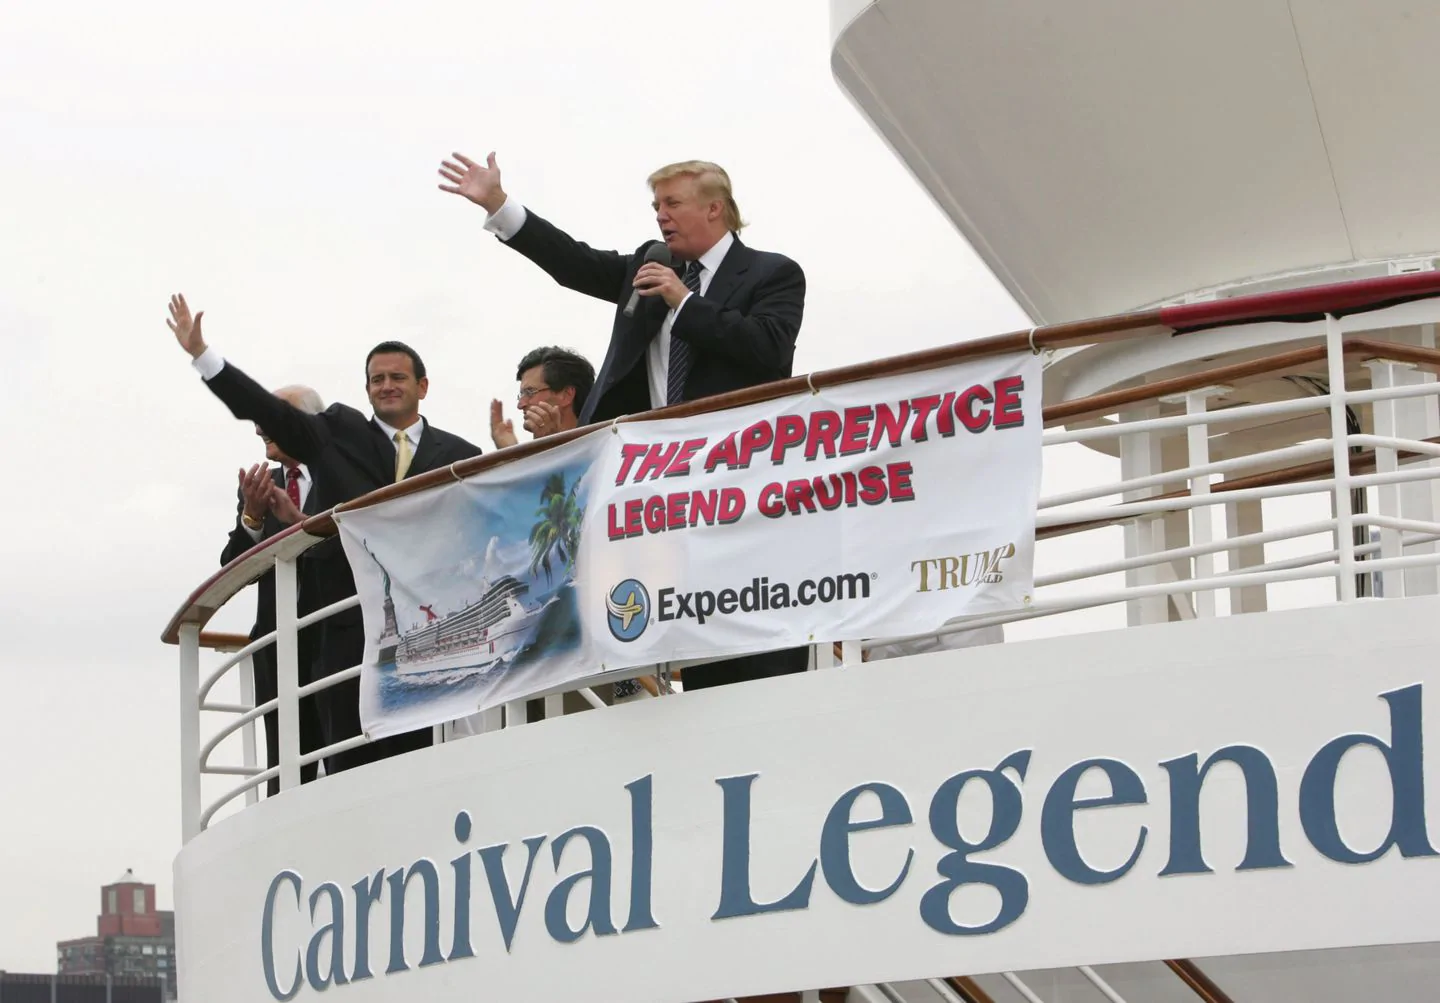 Trump's long-standing ties to cruise industry tested by coronavirus pandemic